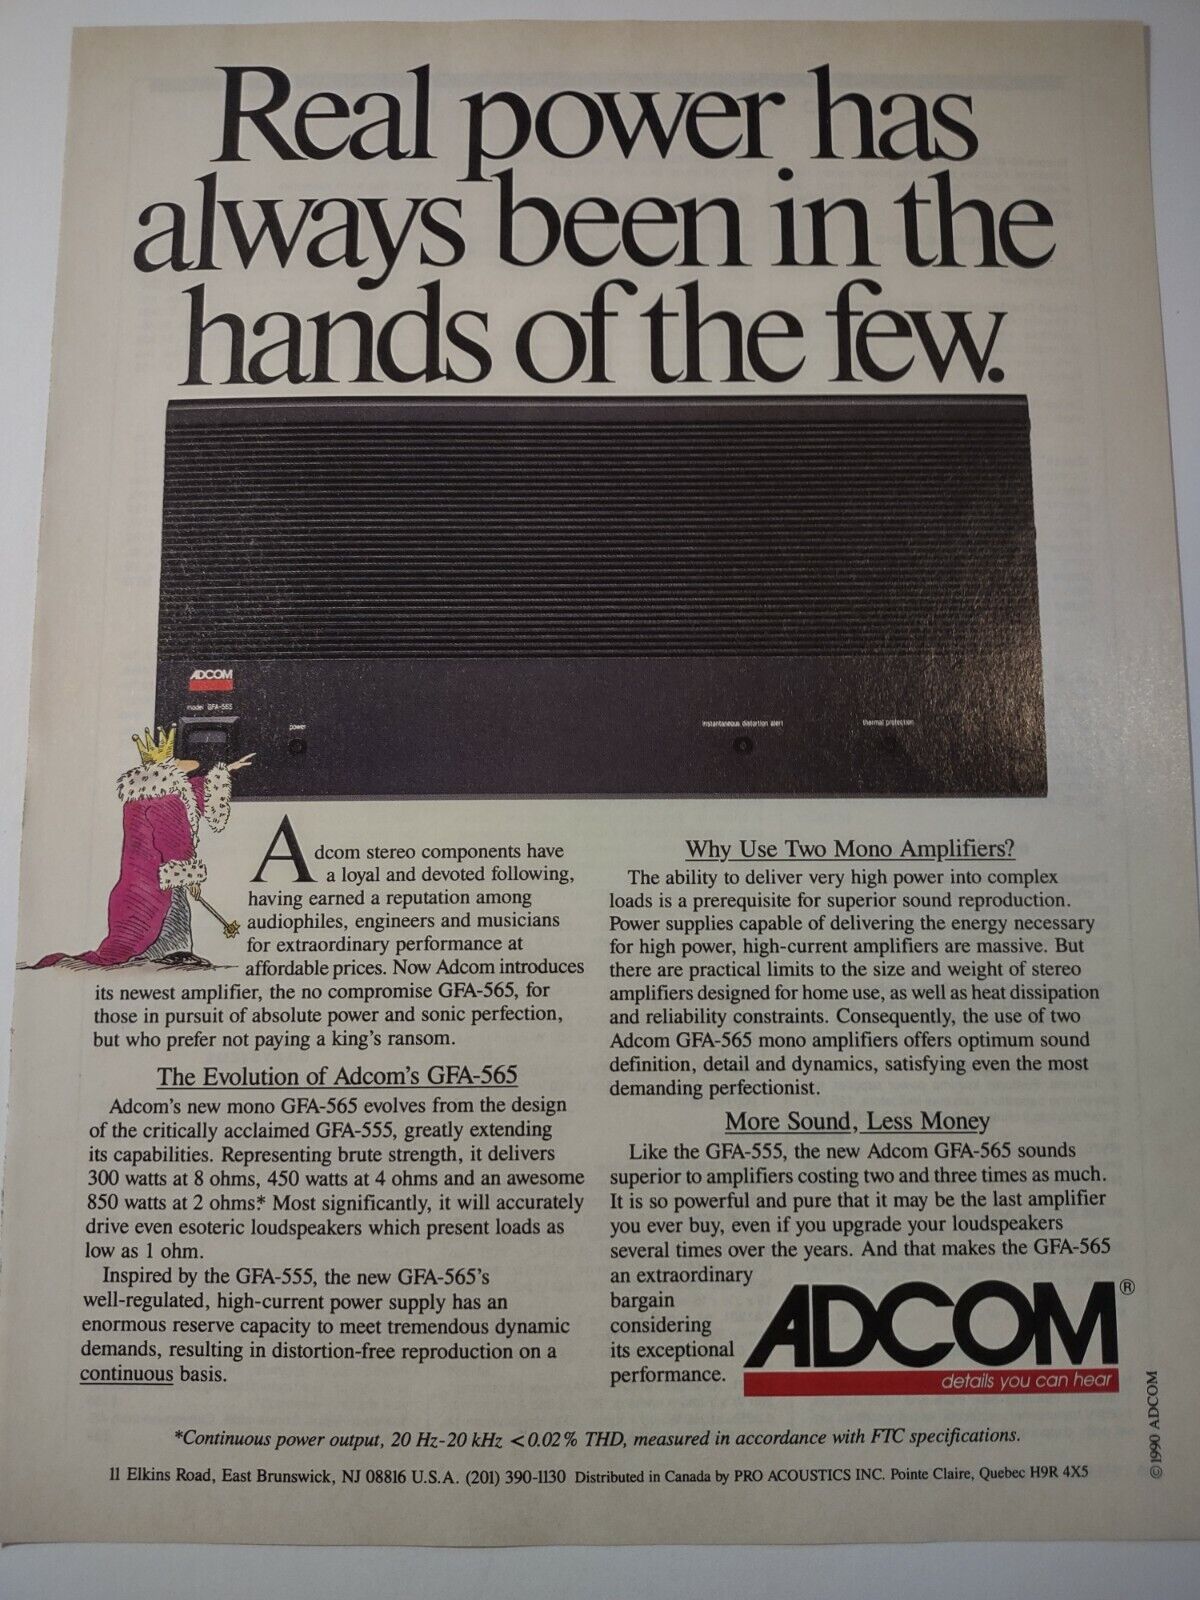 Adcom GFA 565 Mono Amplifier Real Power Hands of the Few Vintage Print Ad